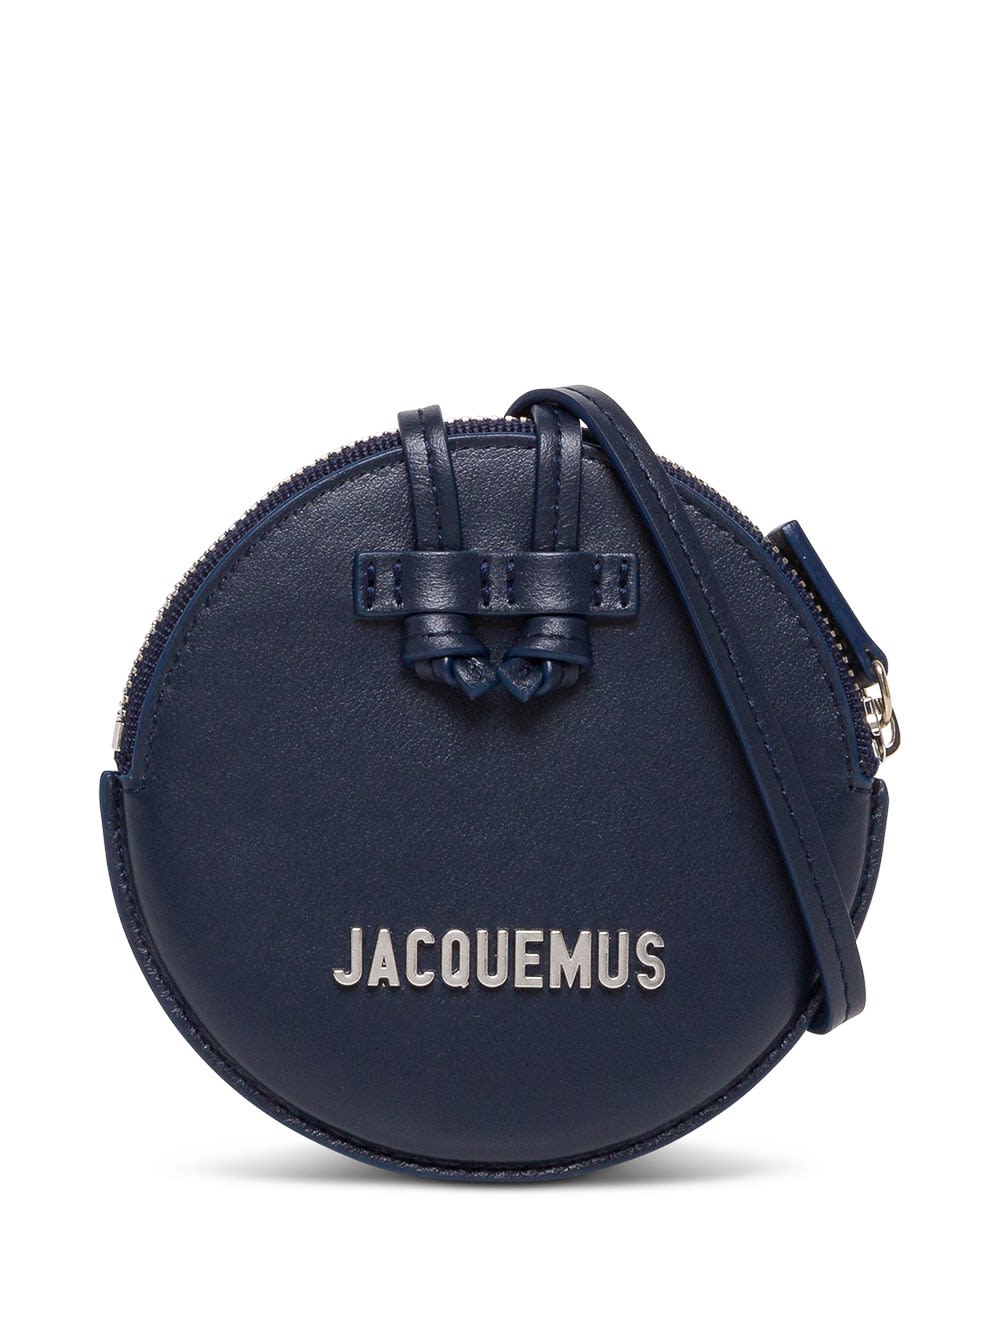 Jacquemus Le Pitchou Crossbody Bag In Blue Leather